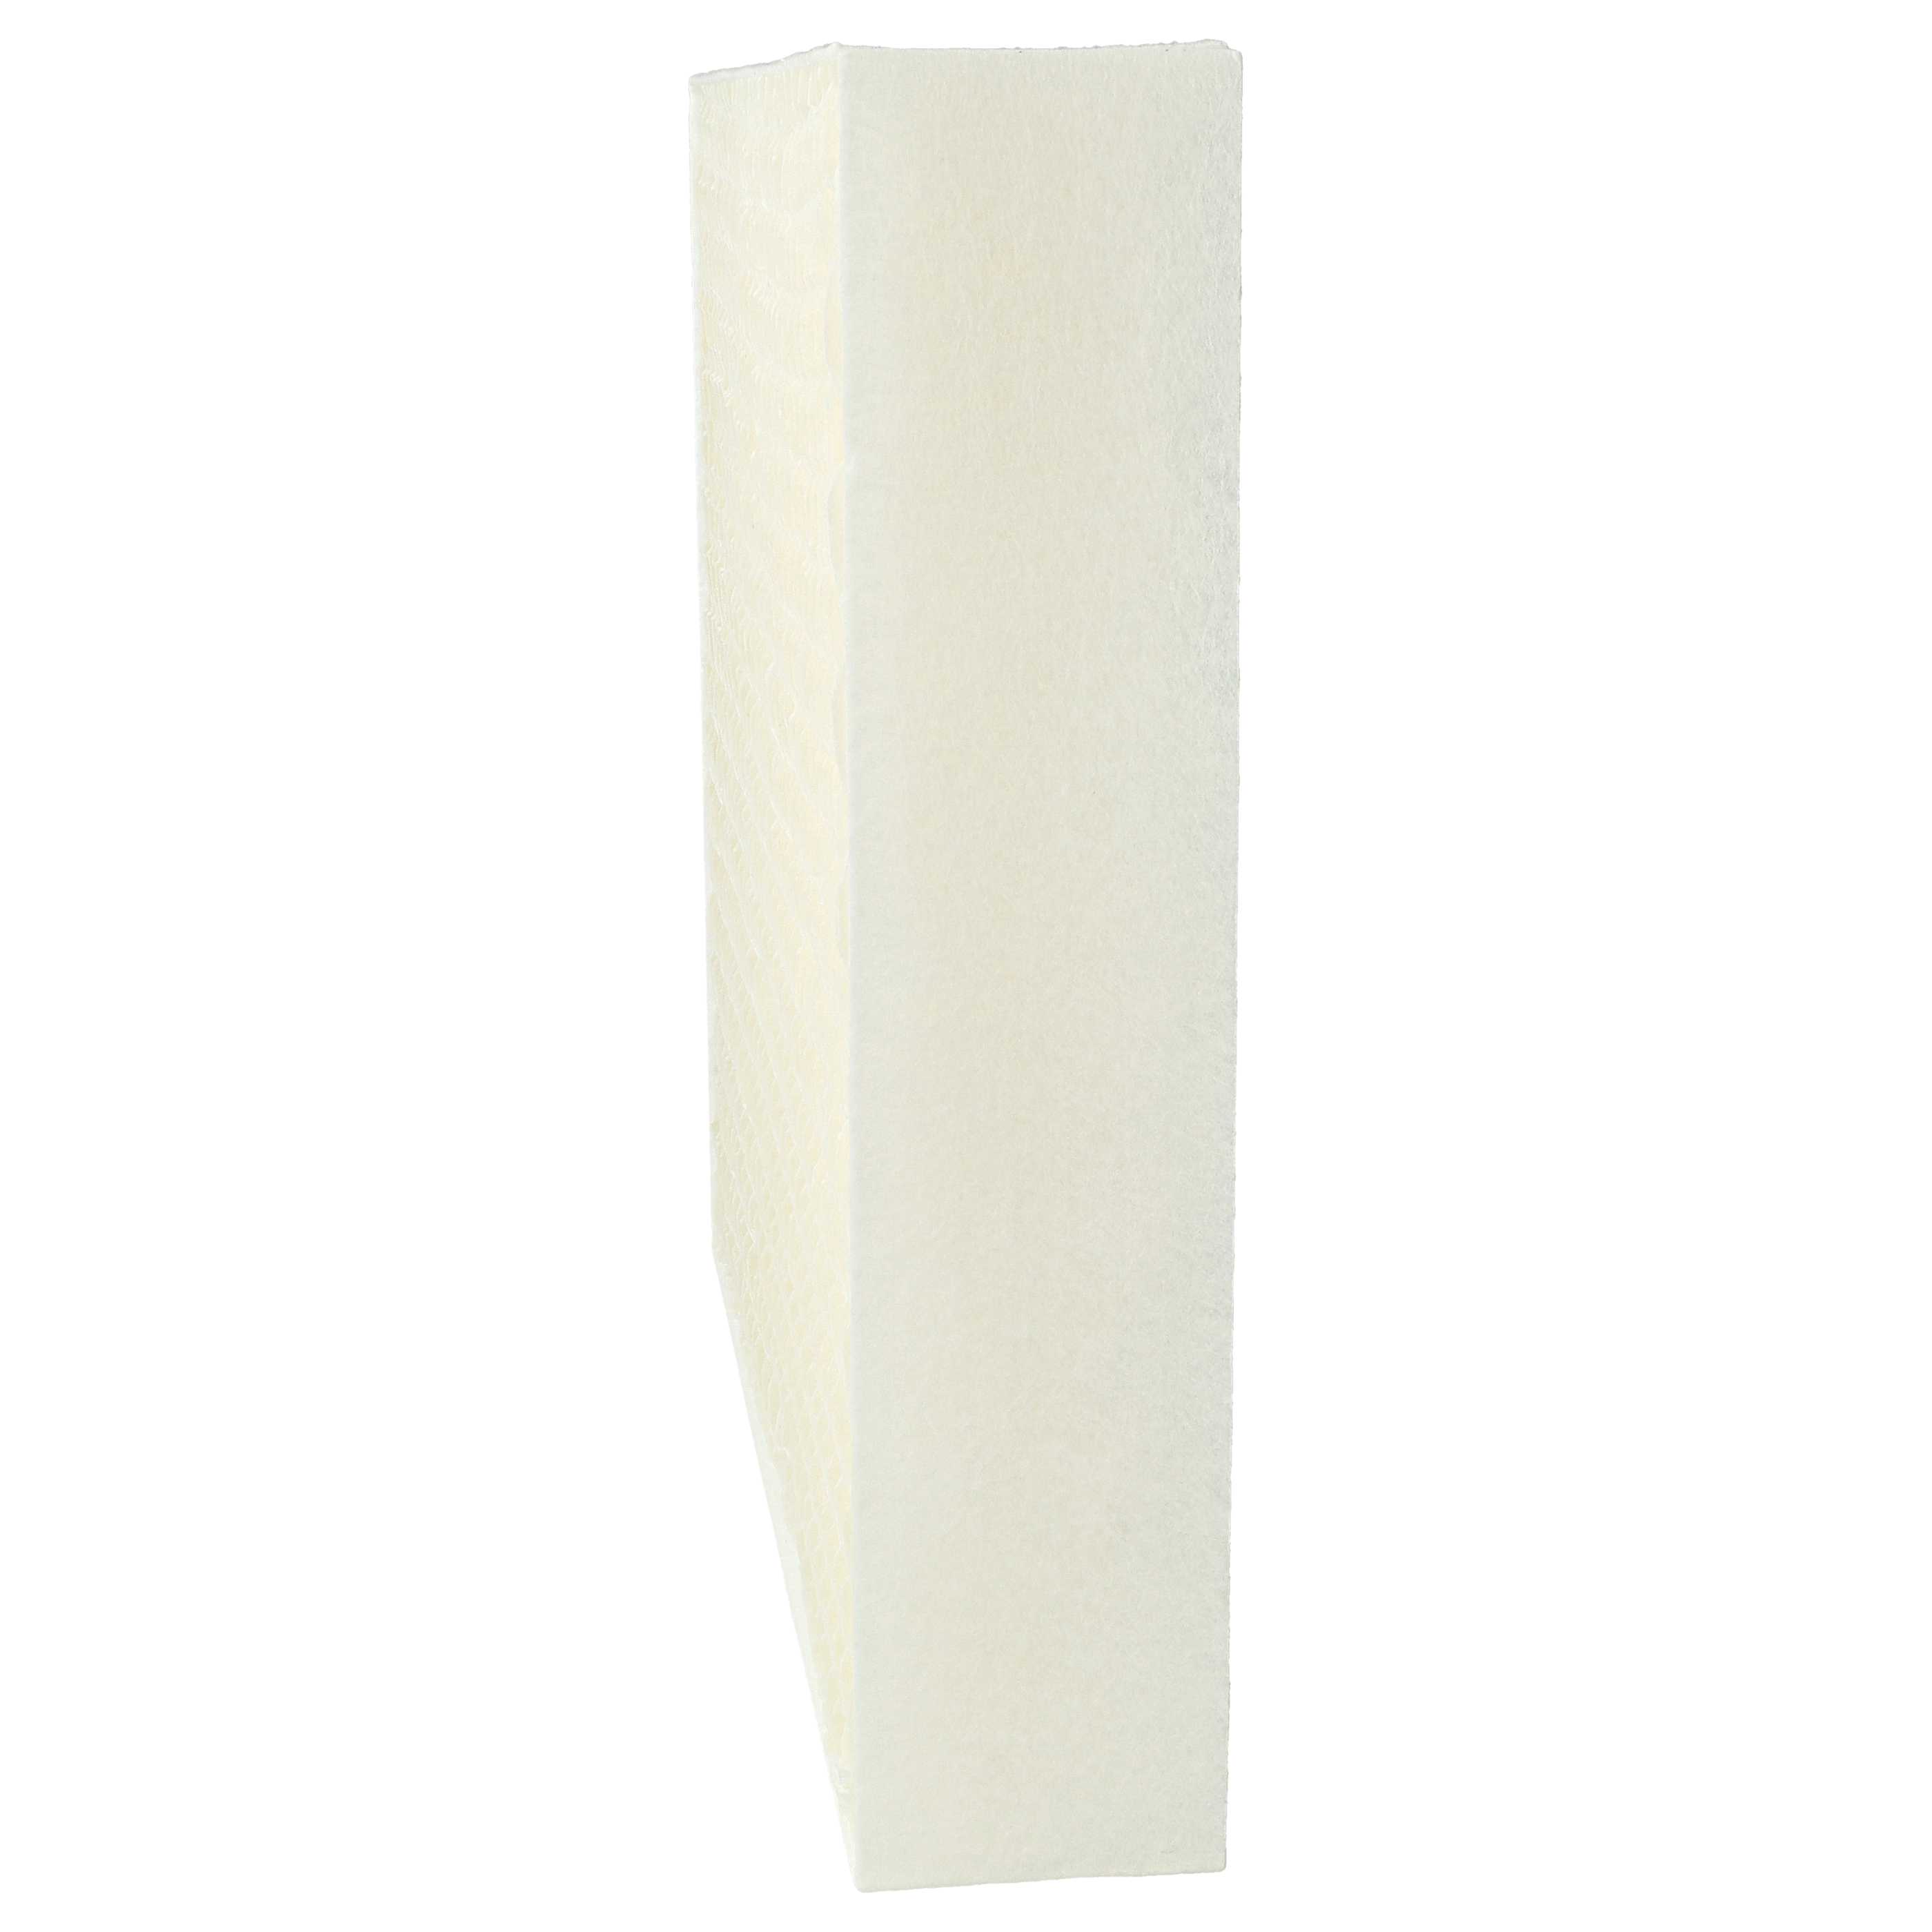 4x Filter replaces Stadler Form 10004, 14643/10 for Humidifier - paper